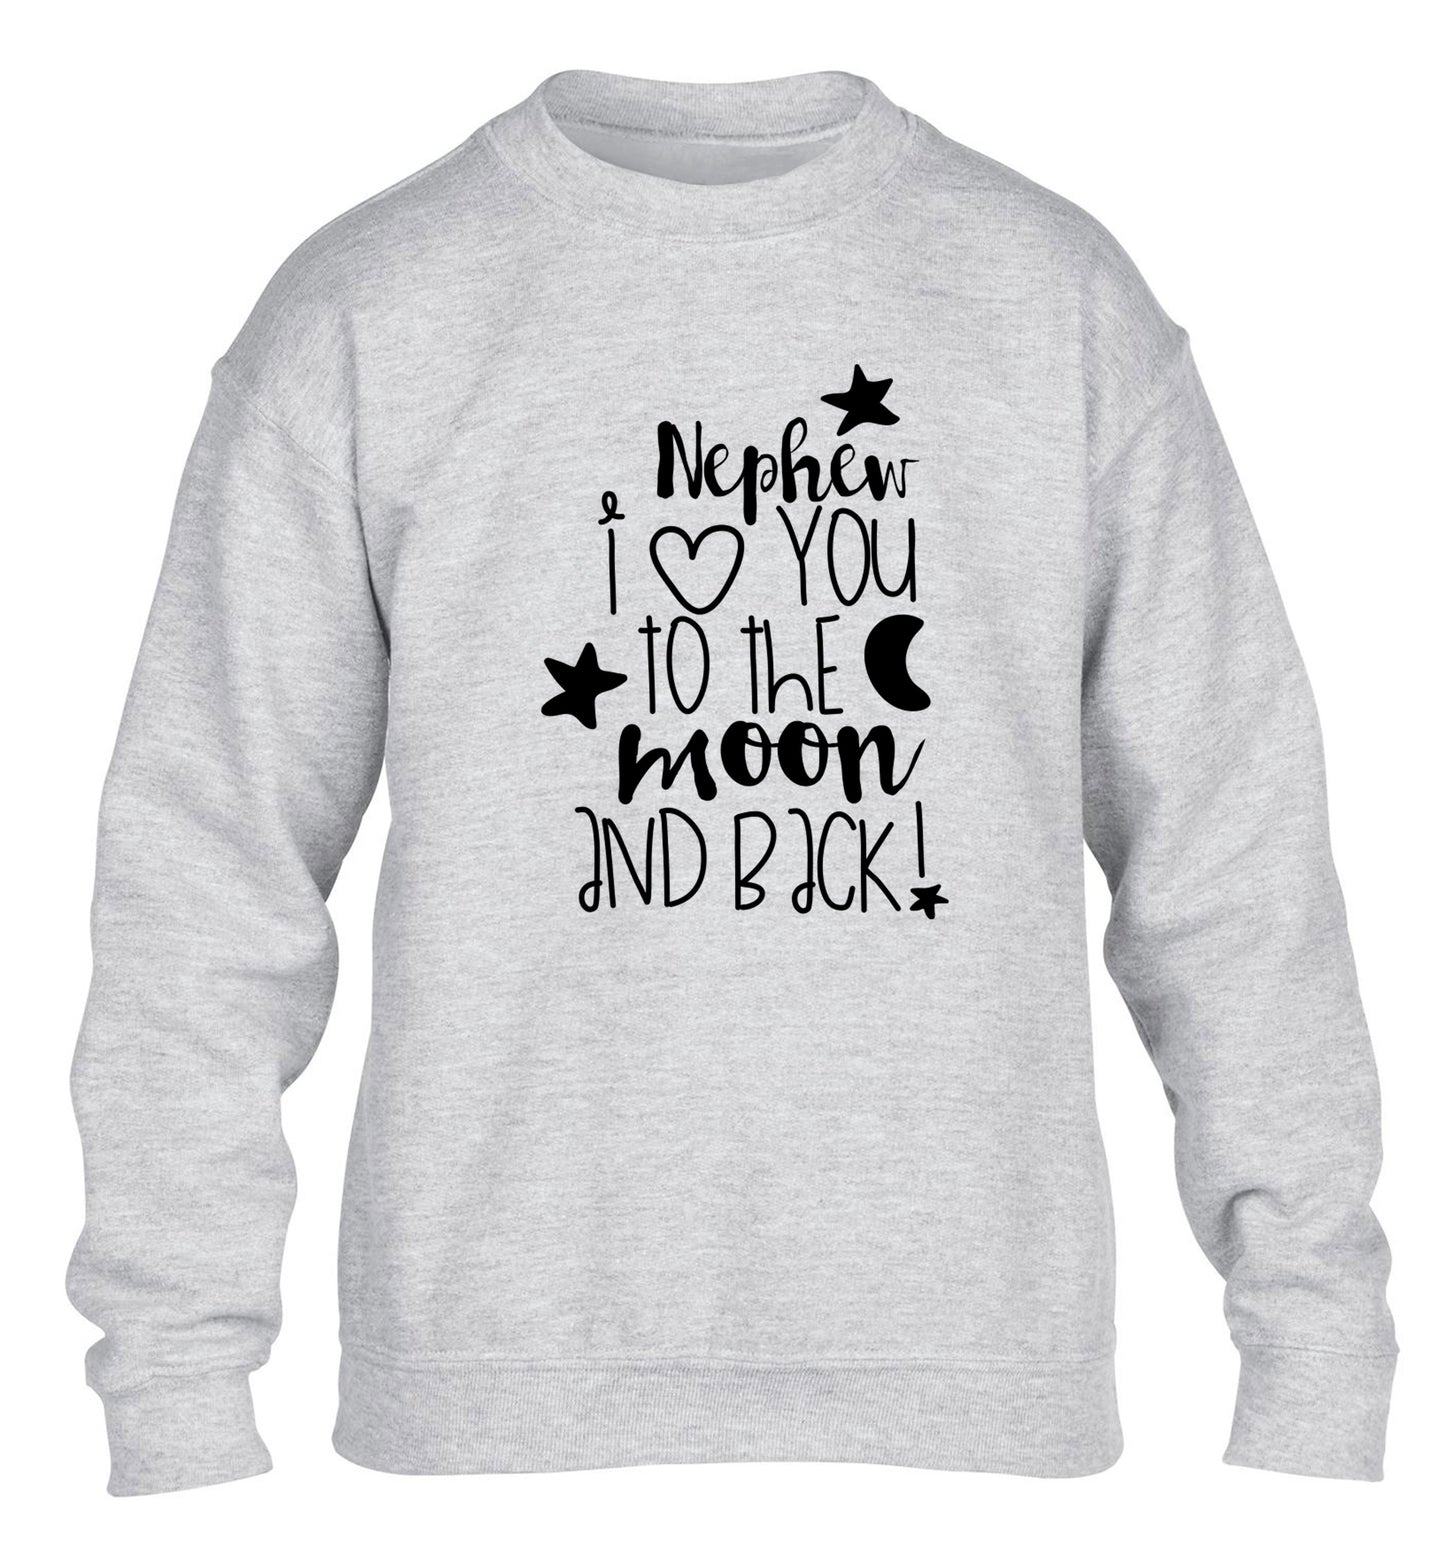 Nephew I love you to the moon and back children's grey  sweater 12-14 Years